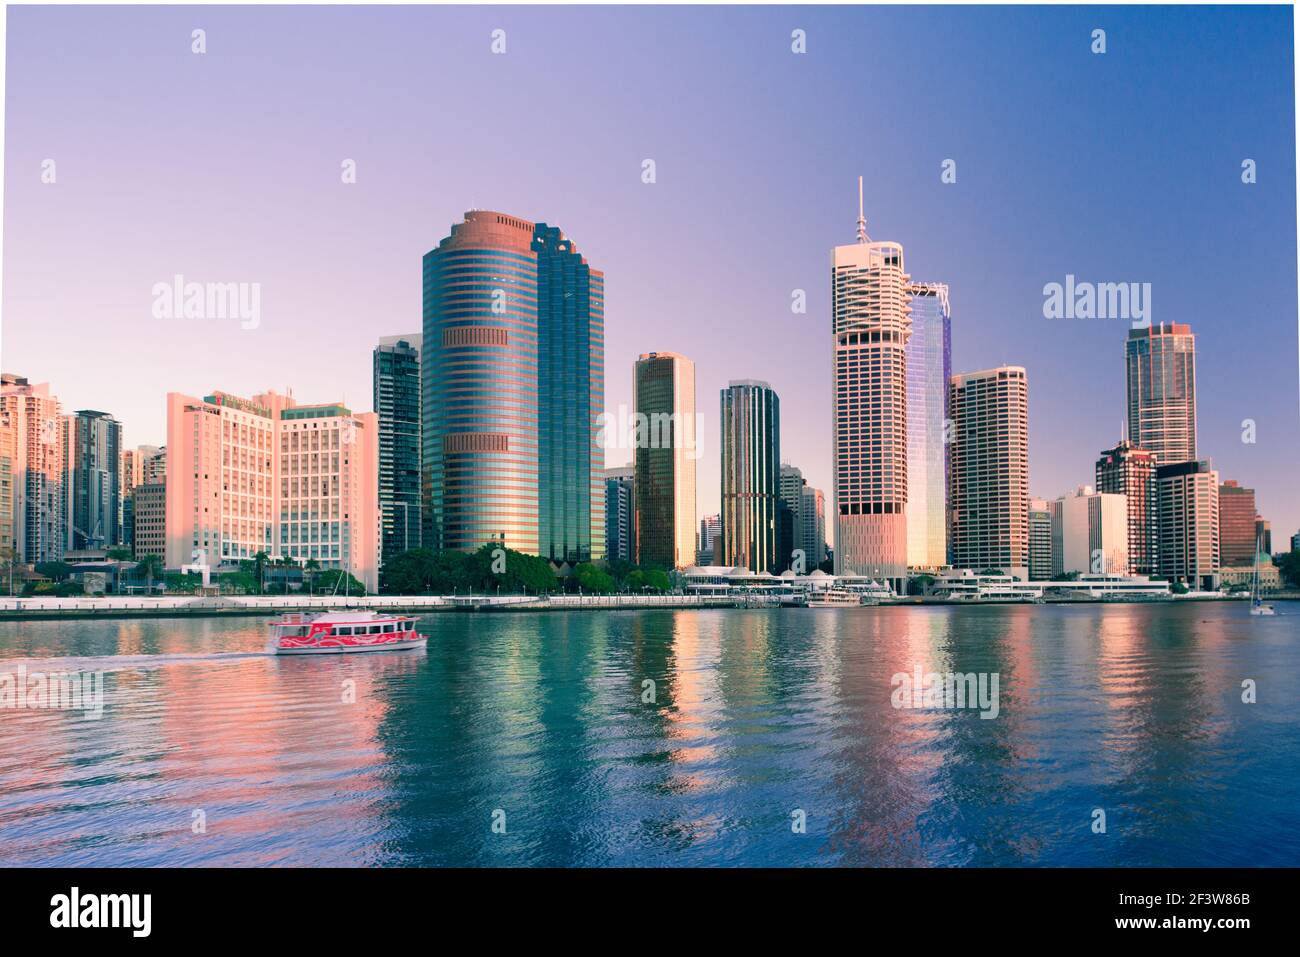 Early morning view of Brisbane city buildings located in the area known as Waterfront Place. Brisbane is the state capital of Queensland, Australia. Stock Photo